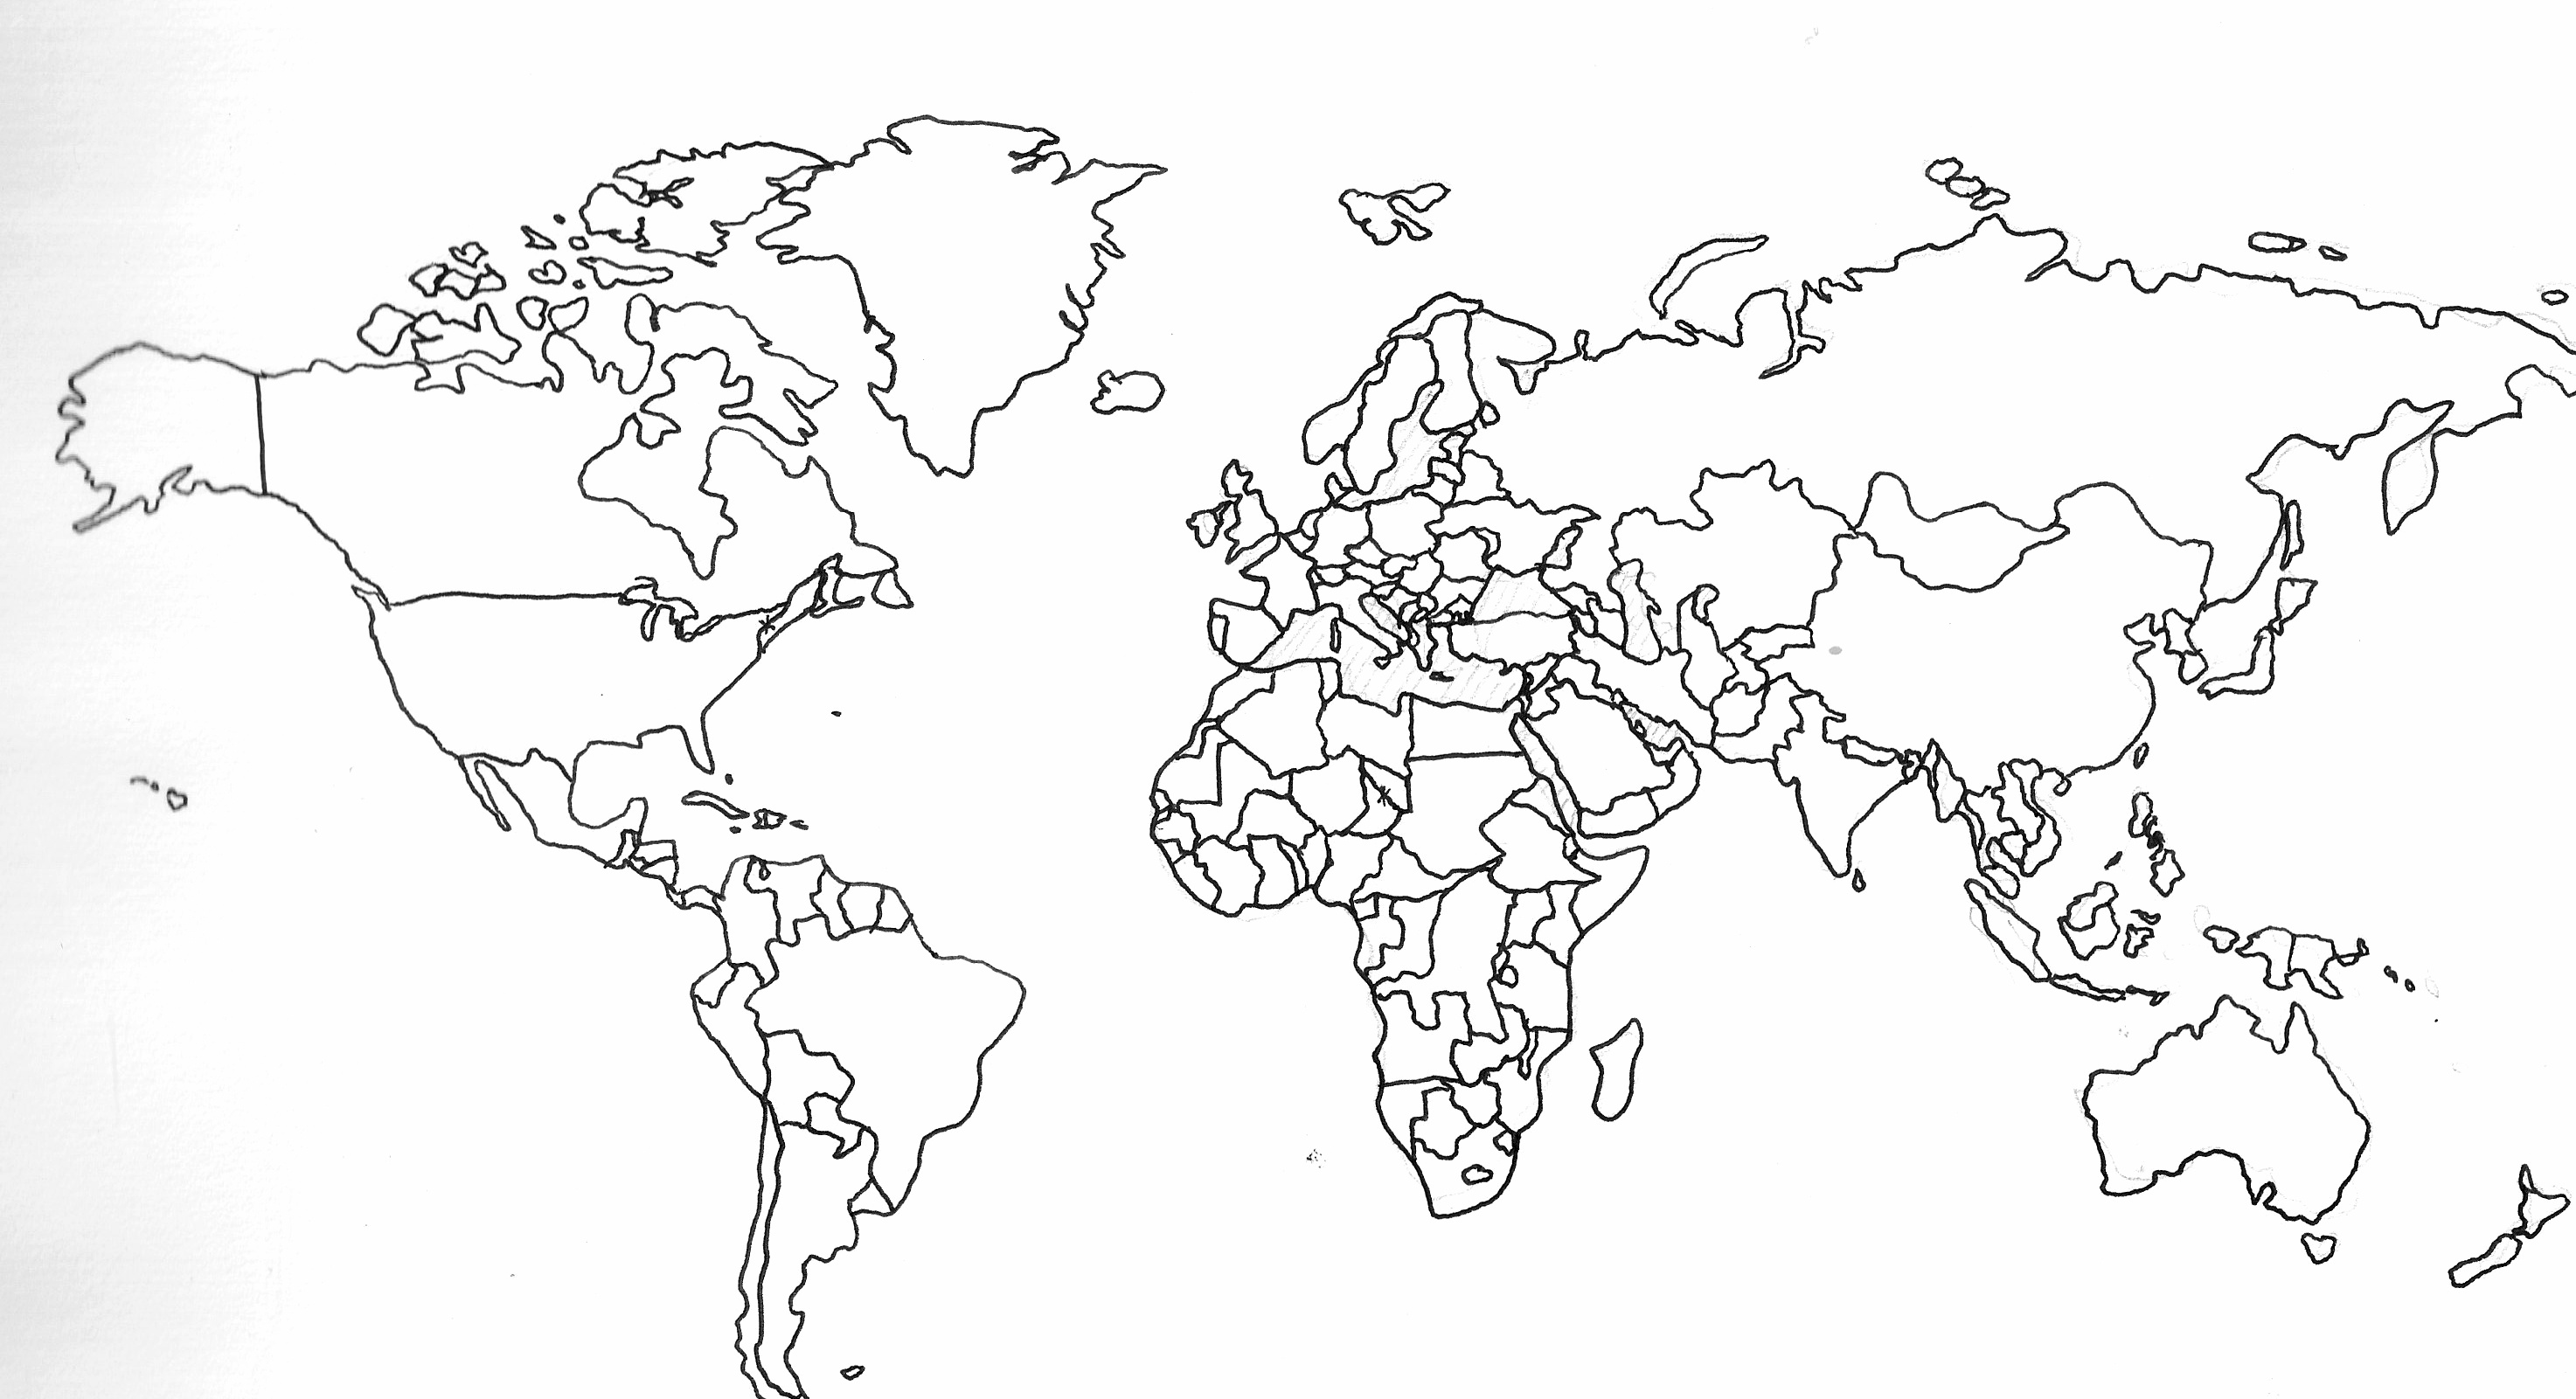 blank-world-map-with-countries-outlinedhappy-valentines-day--satsumabug-4x4fn8hj